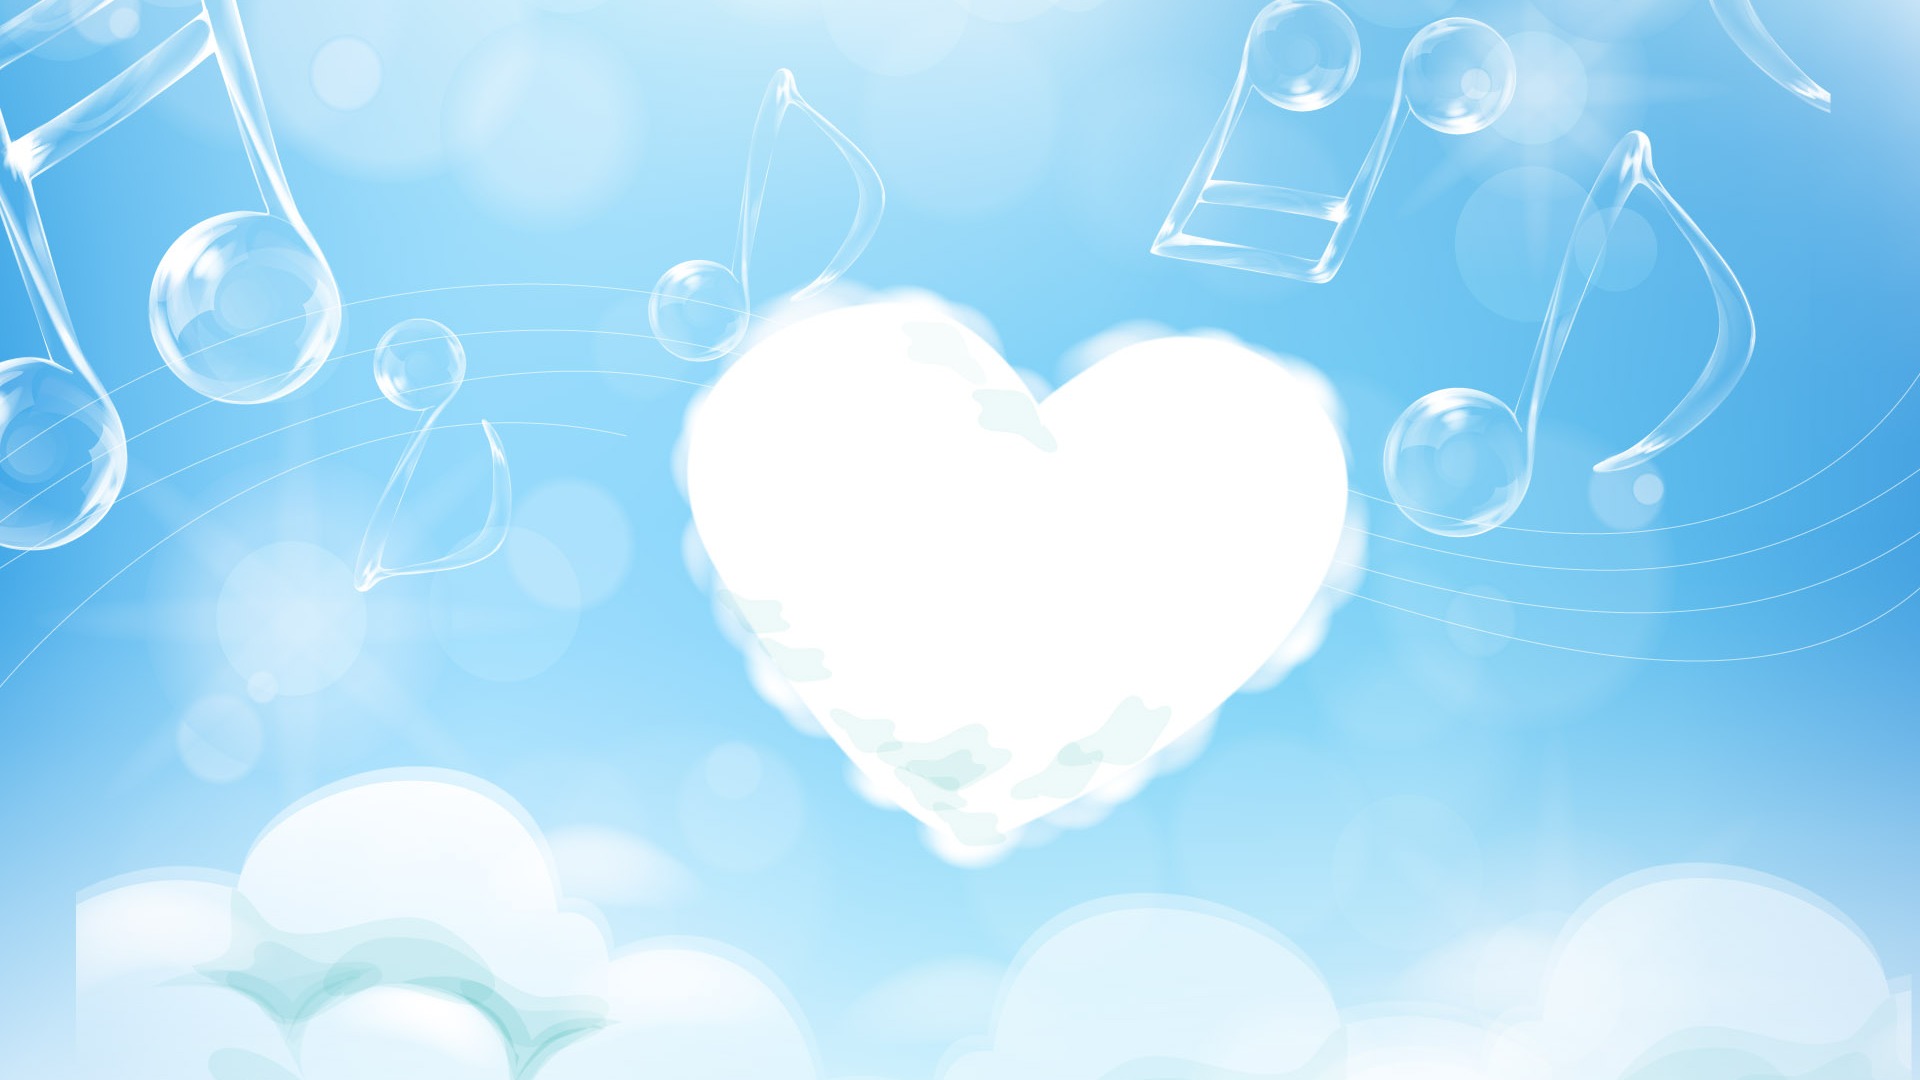 Valentine's Day Love Theme Wallpapers (3) #2 - 1920x1080